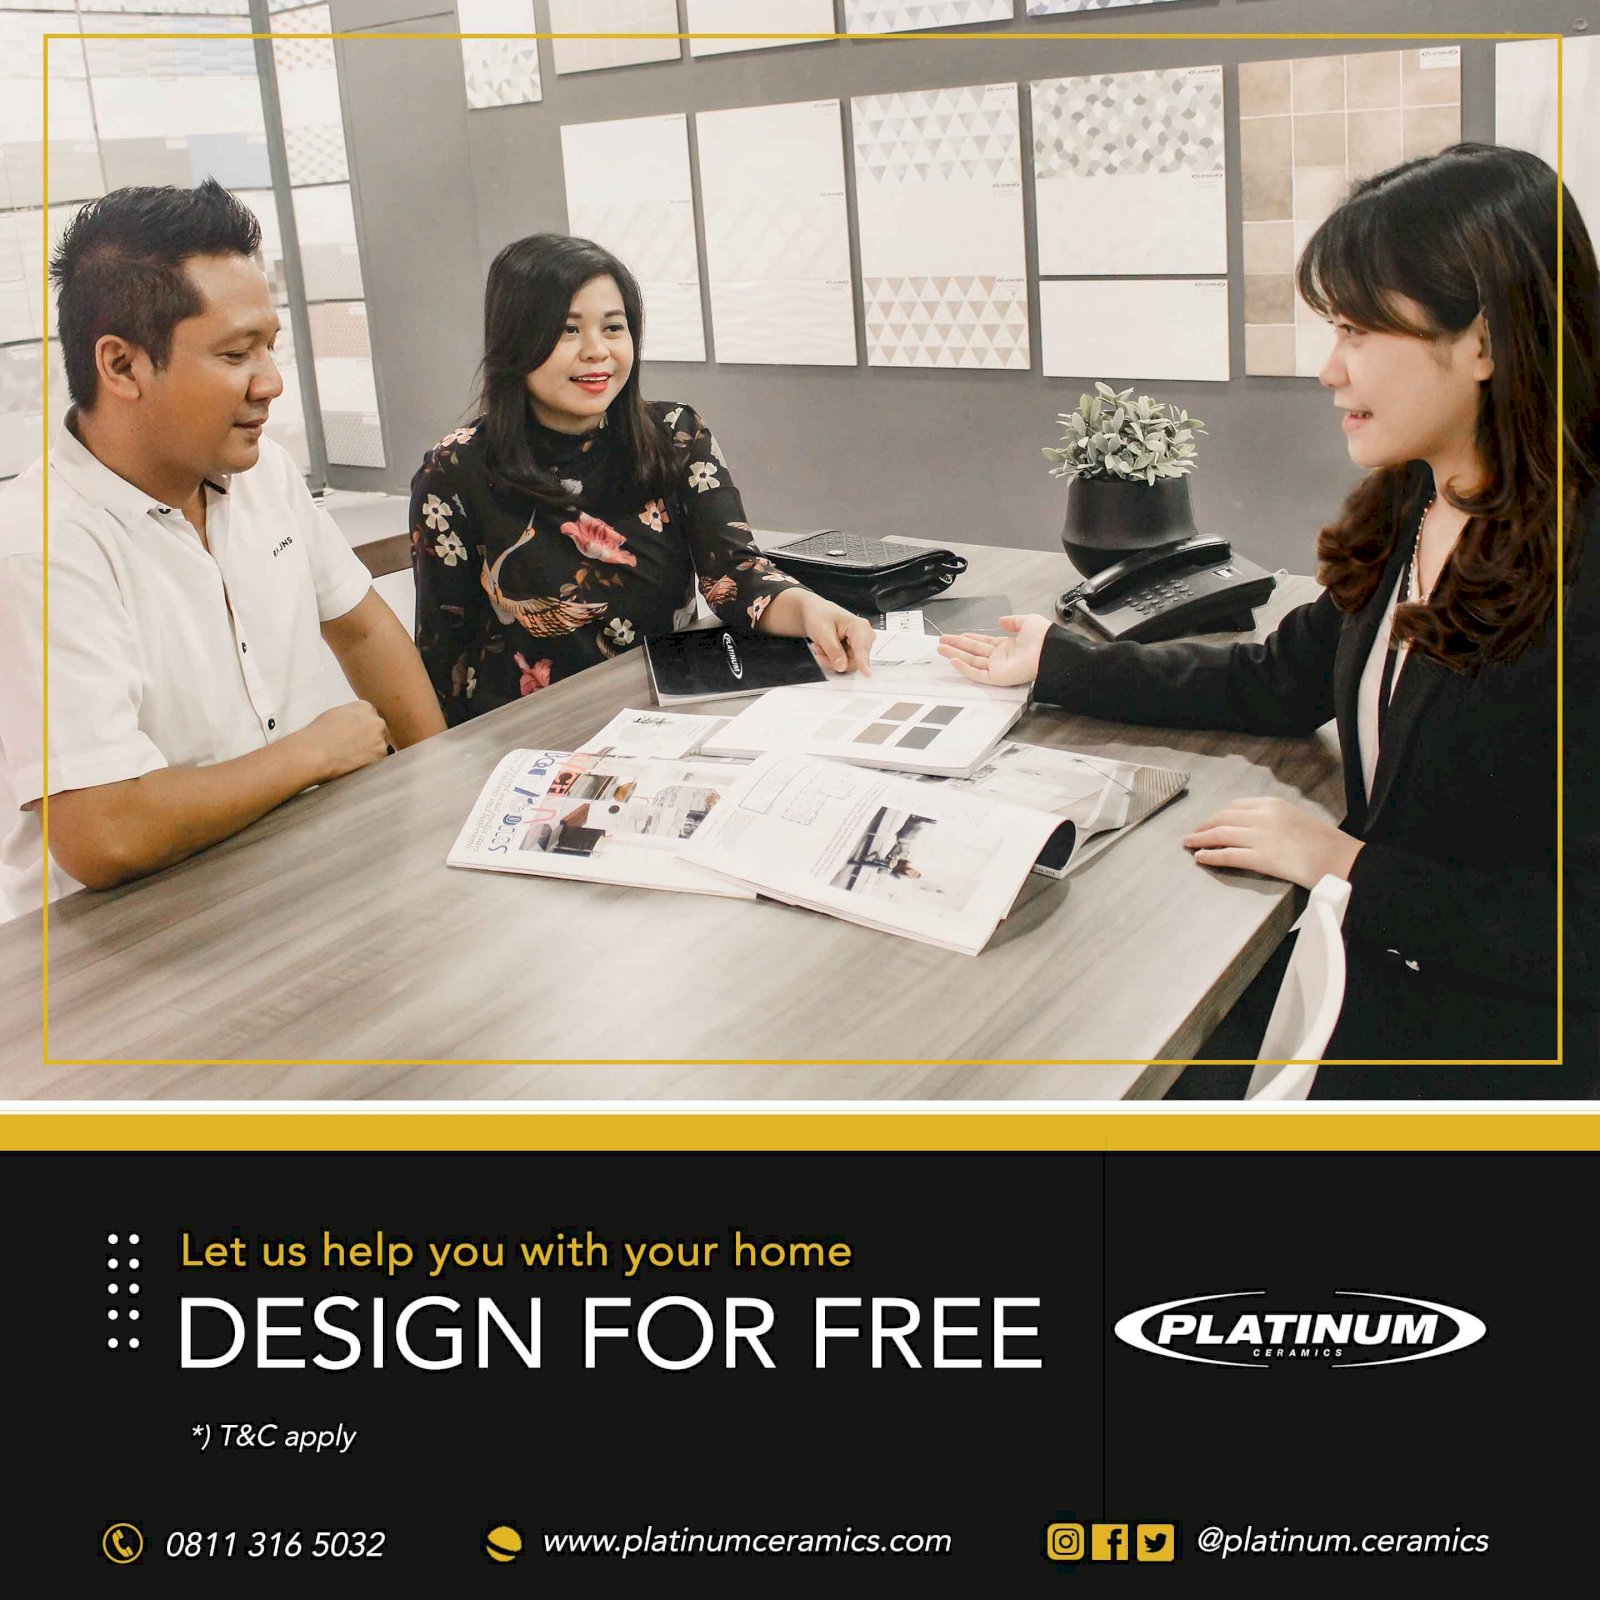 Design your home for free